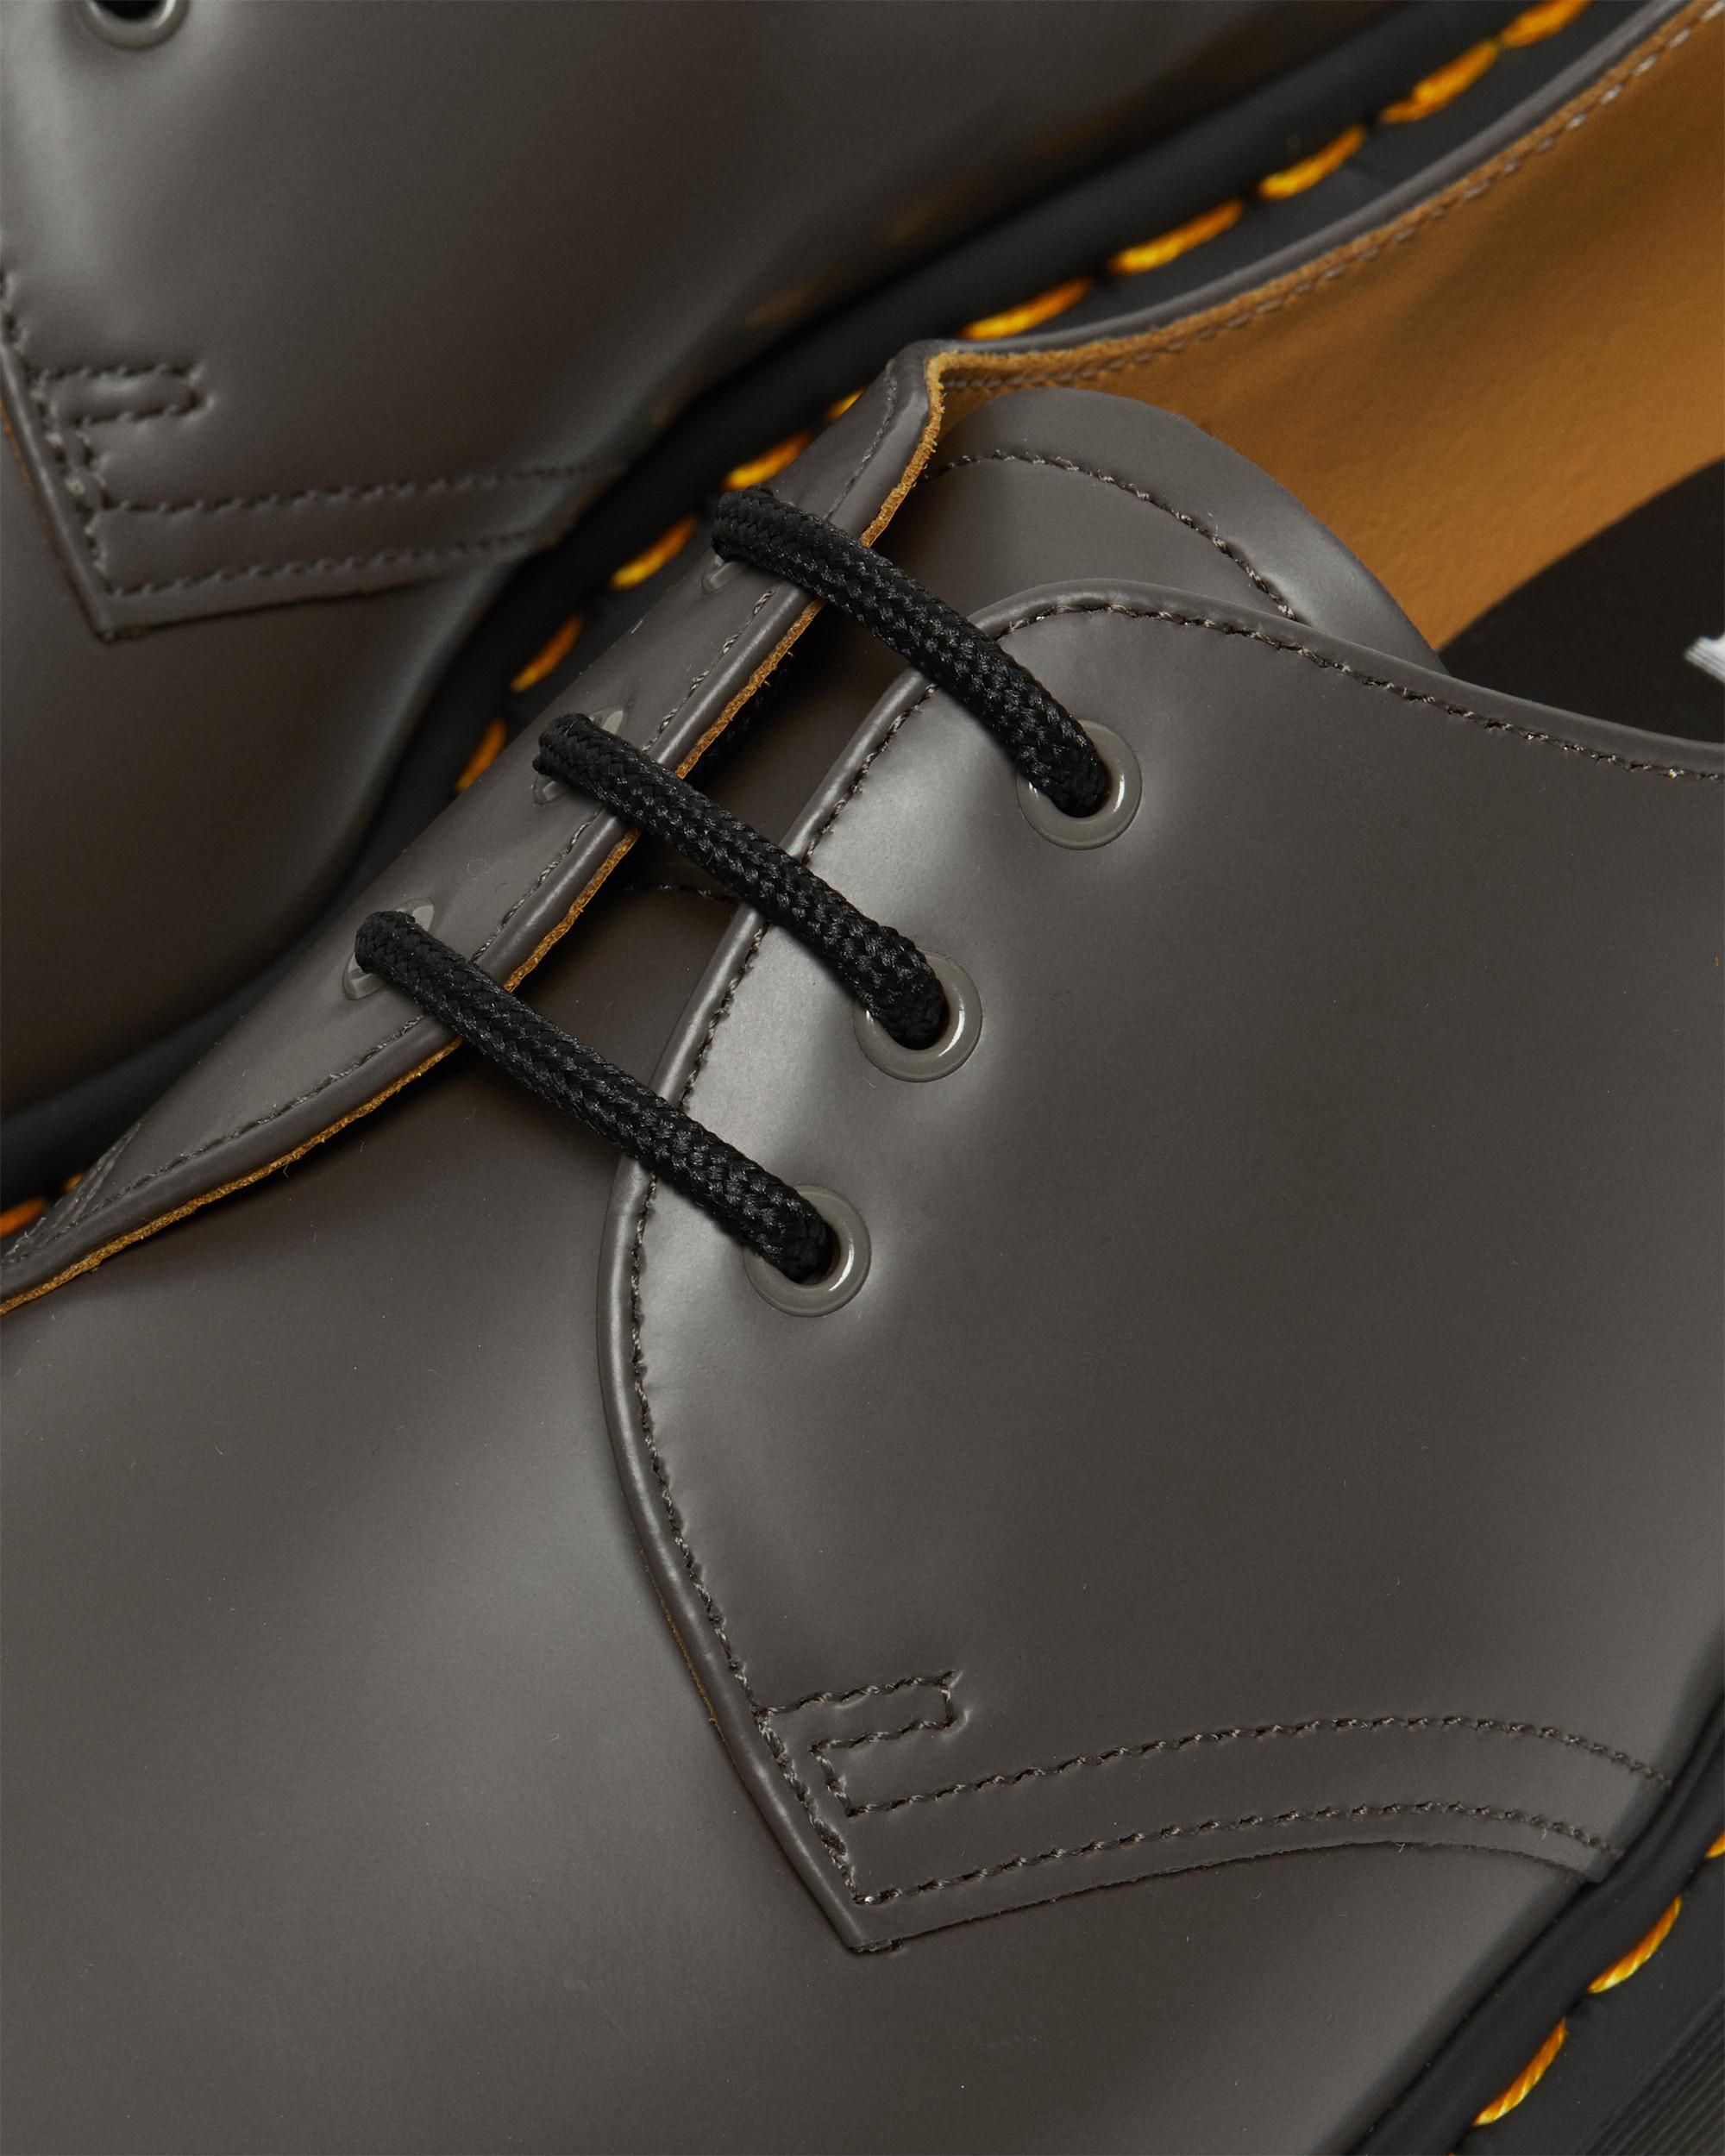 1461 Bex Smooth Leather Oxford Shoes | Dr. Martens